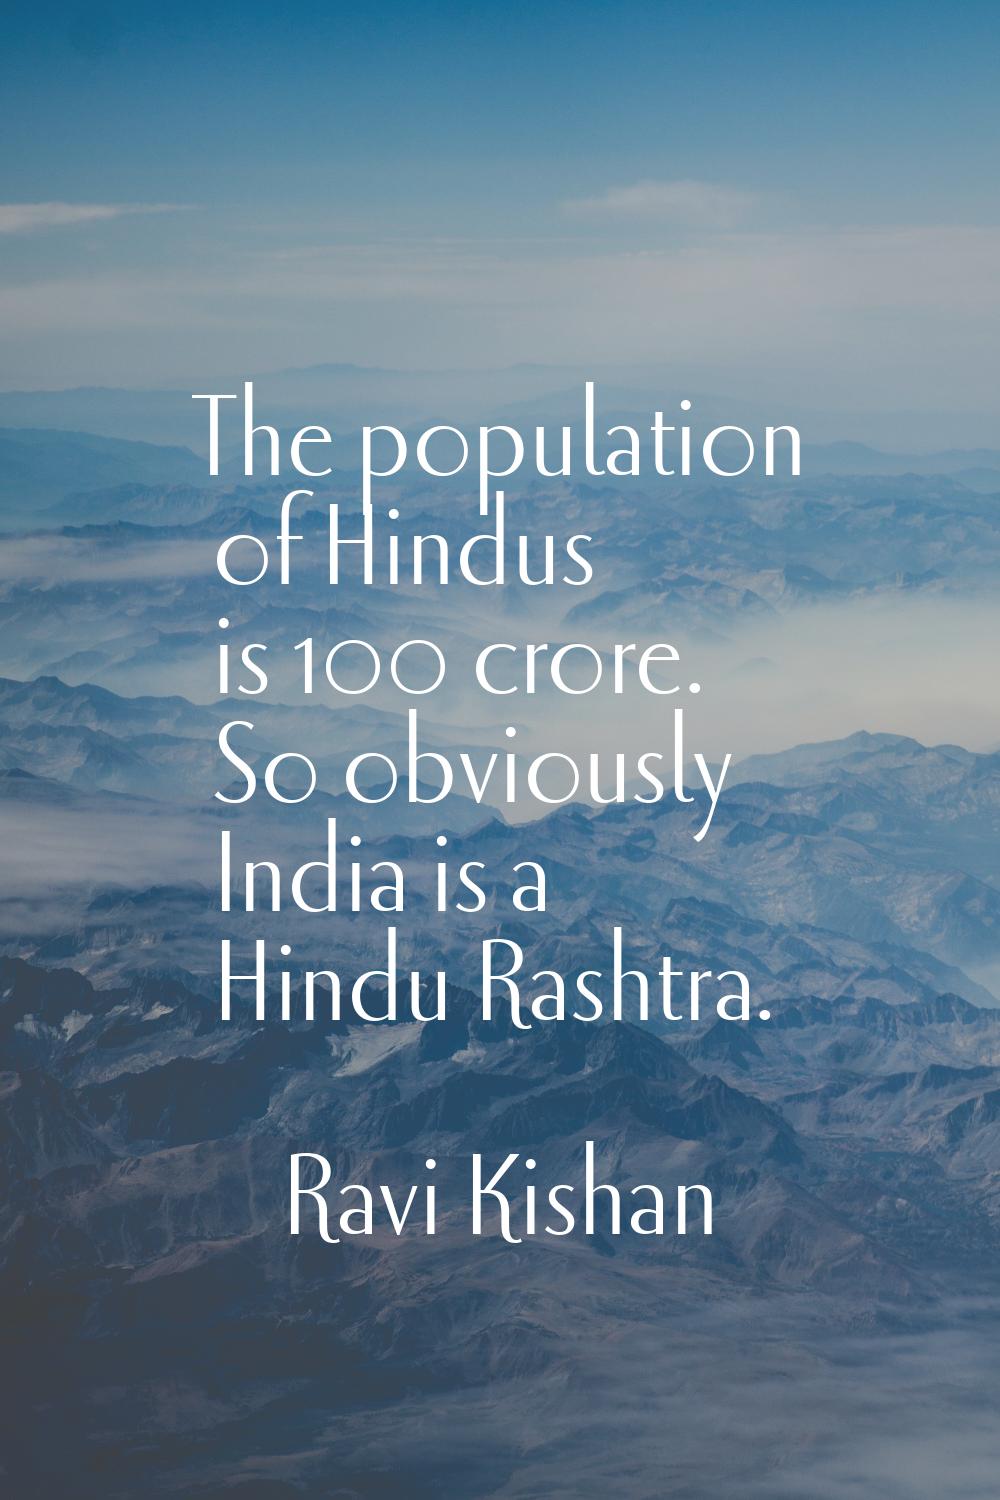 The population of Hindus is 100 crore. So obviously India is a Hindu Rashtra.